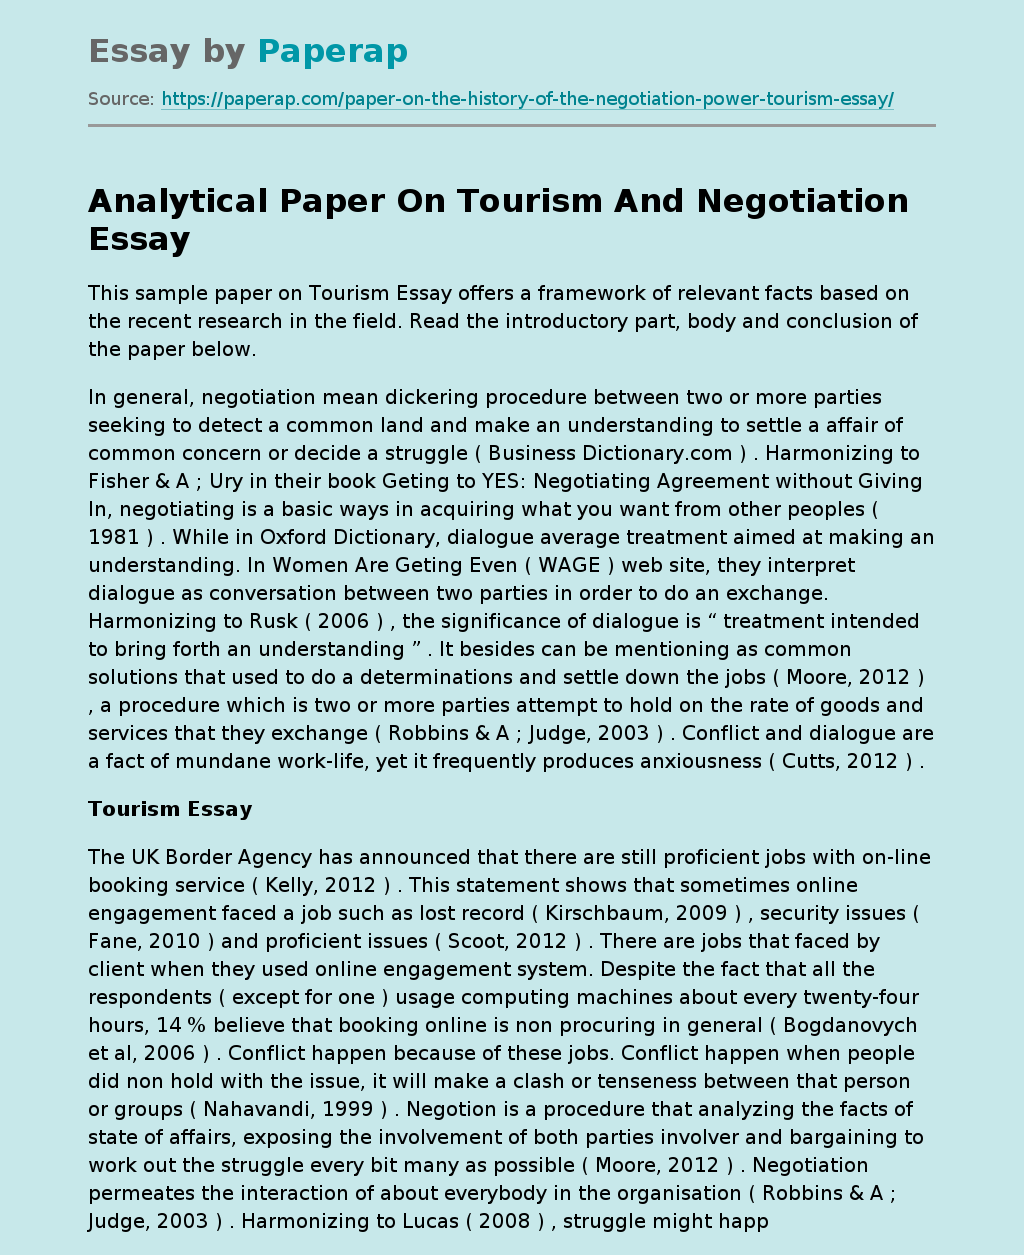 Analytical Paper On Tourism And Negotiation